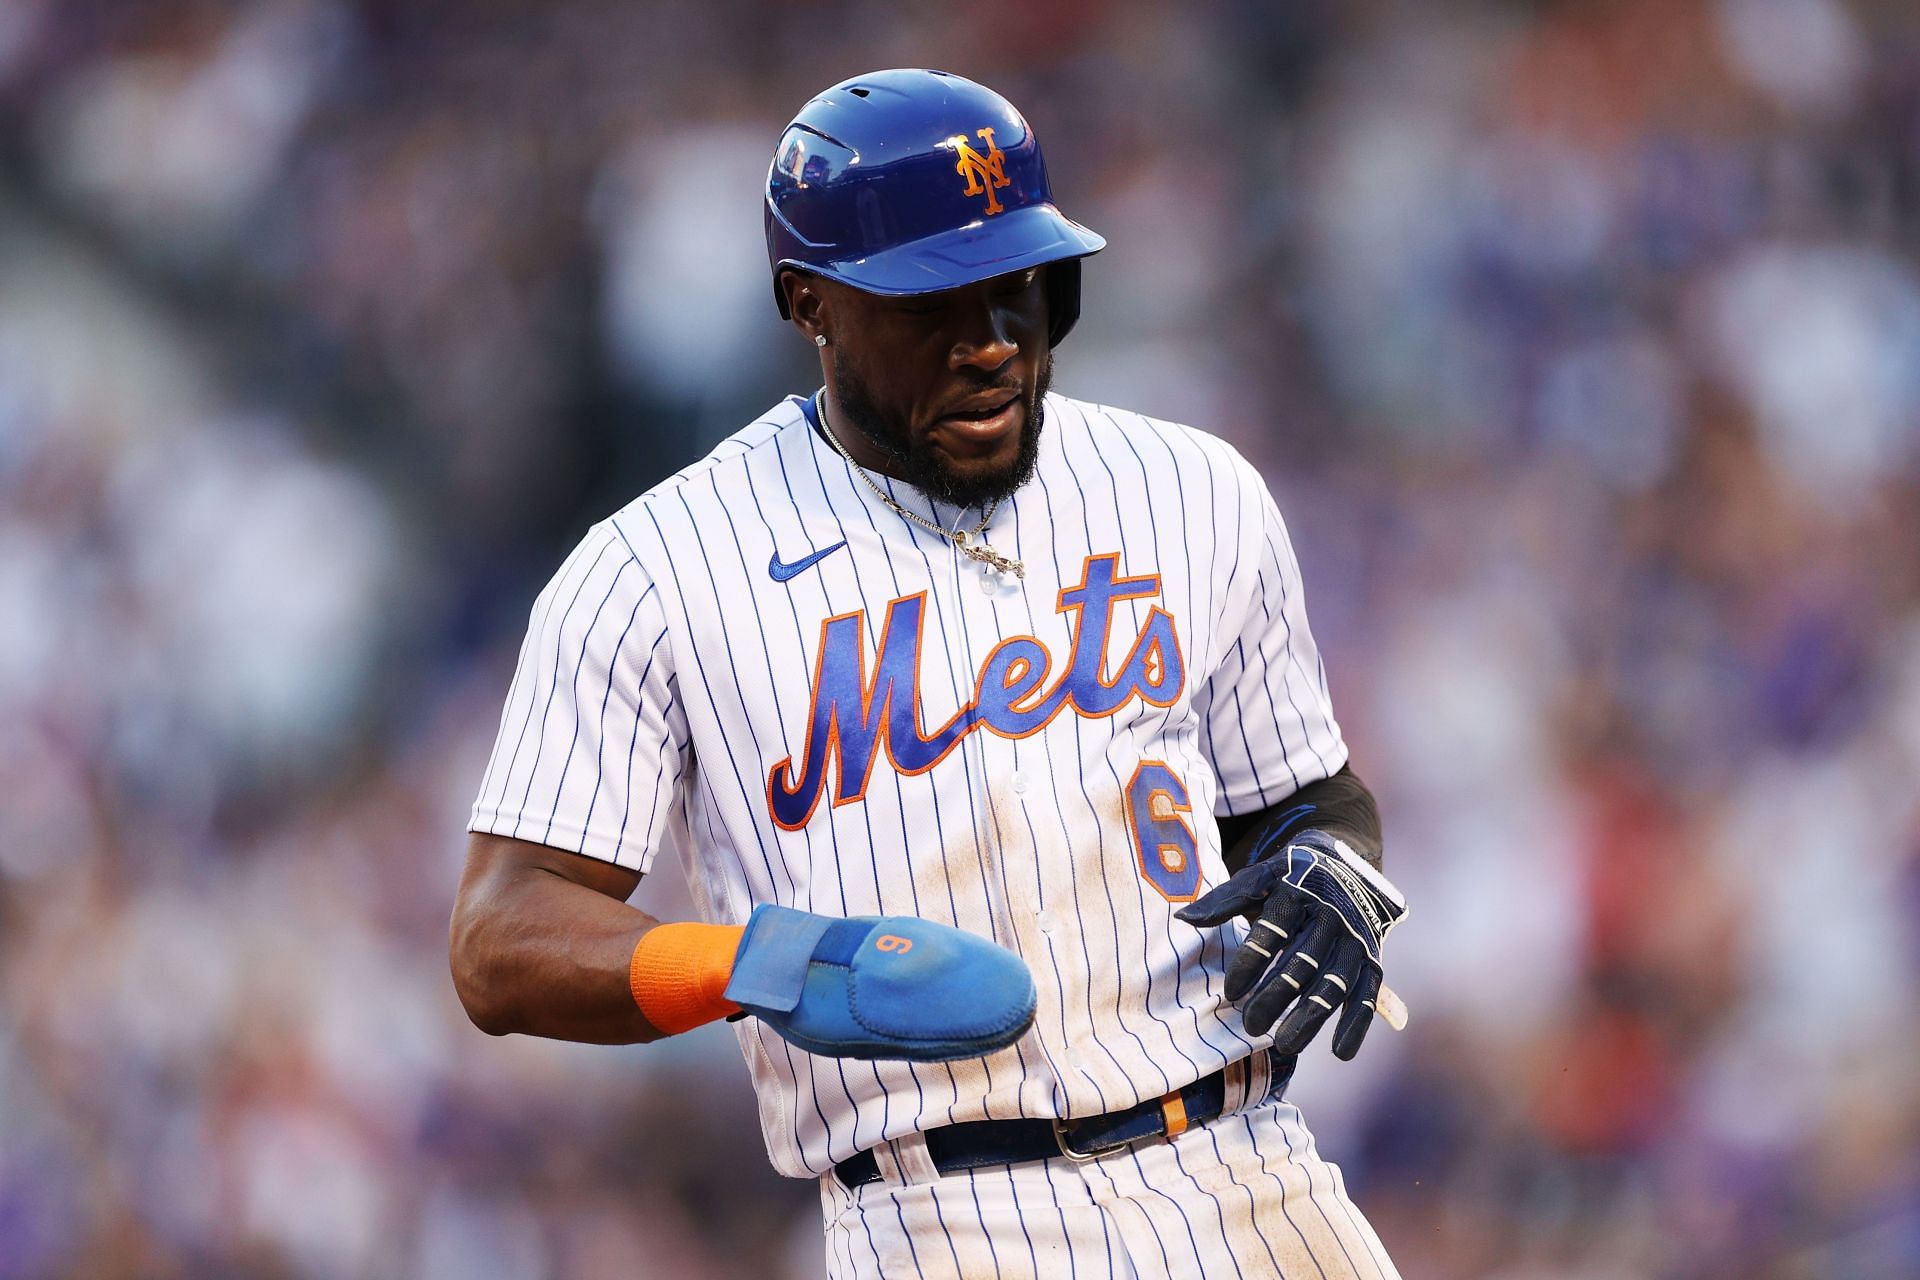 Starling Marte of the New York Mets jogs to first against the Philadelphia Phillies at Citi Field